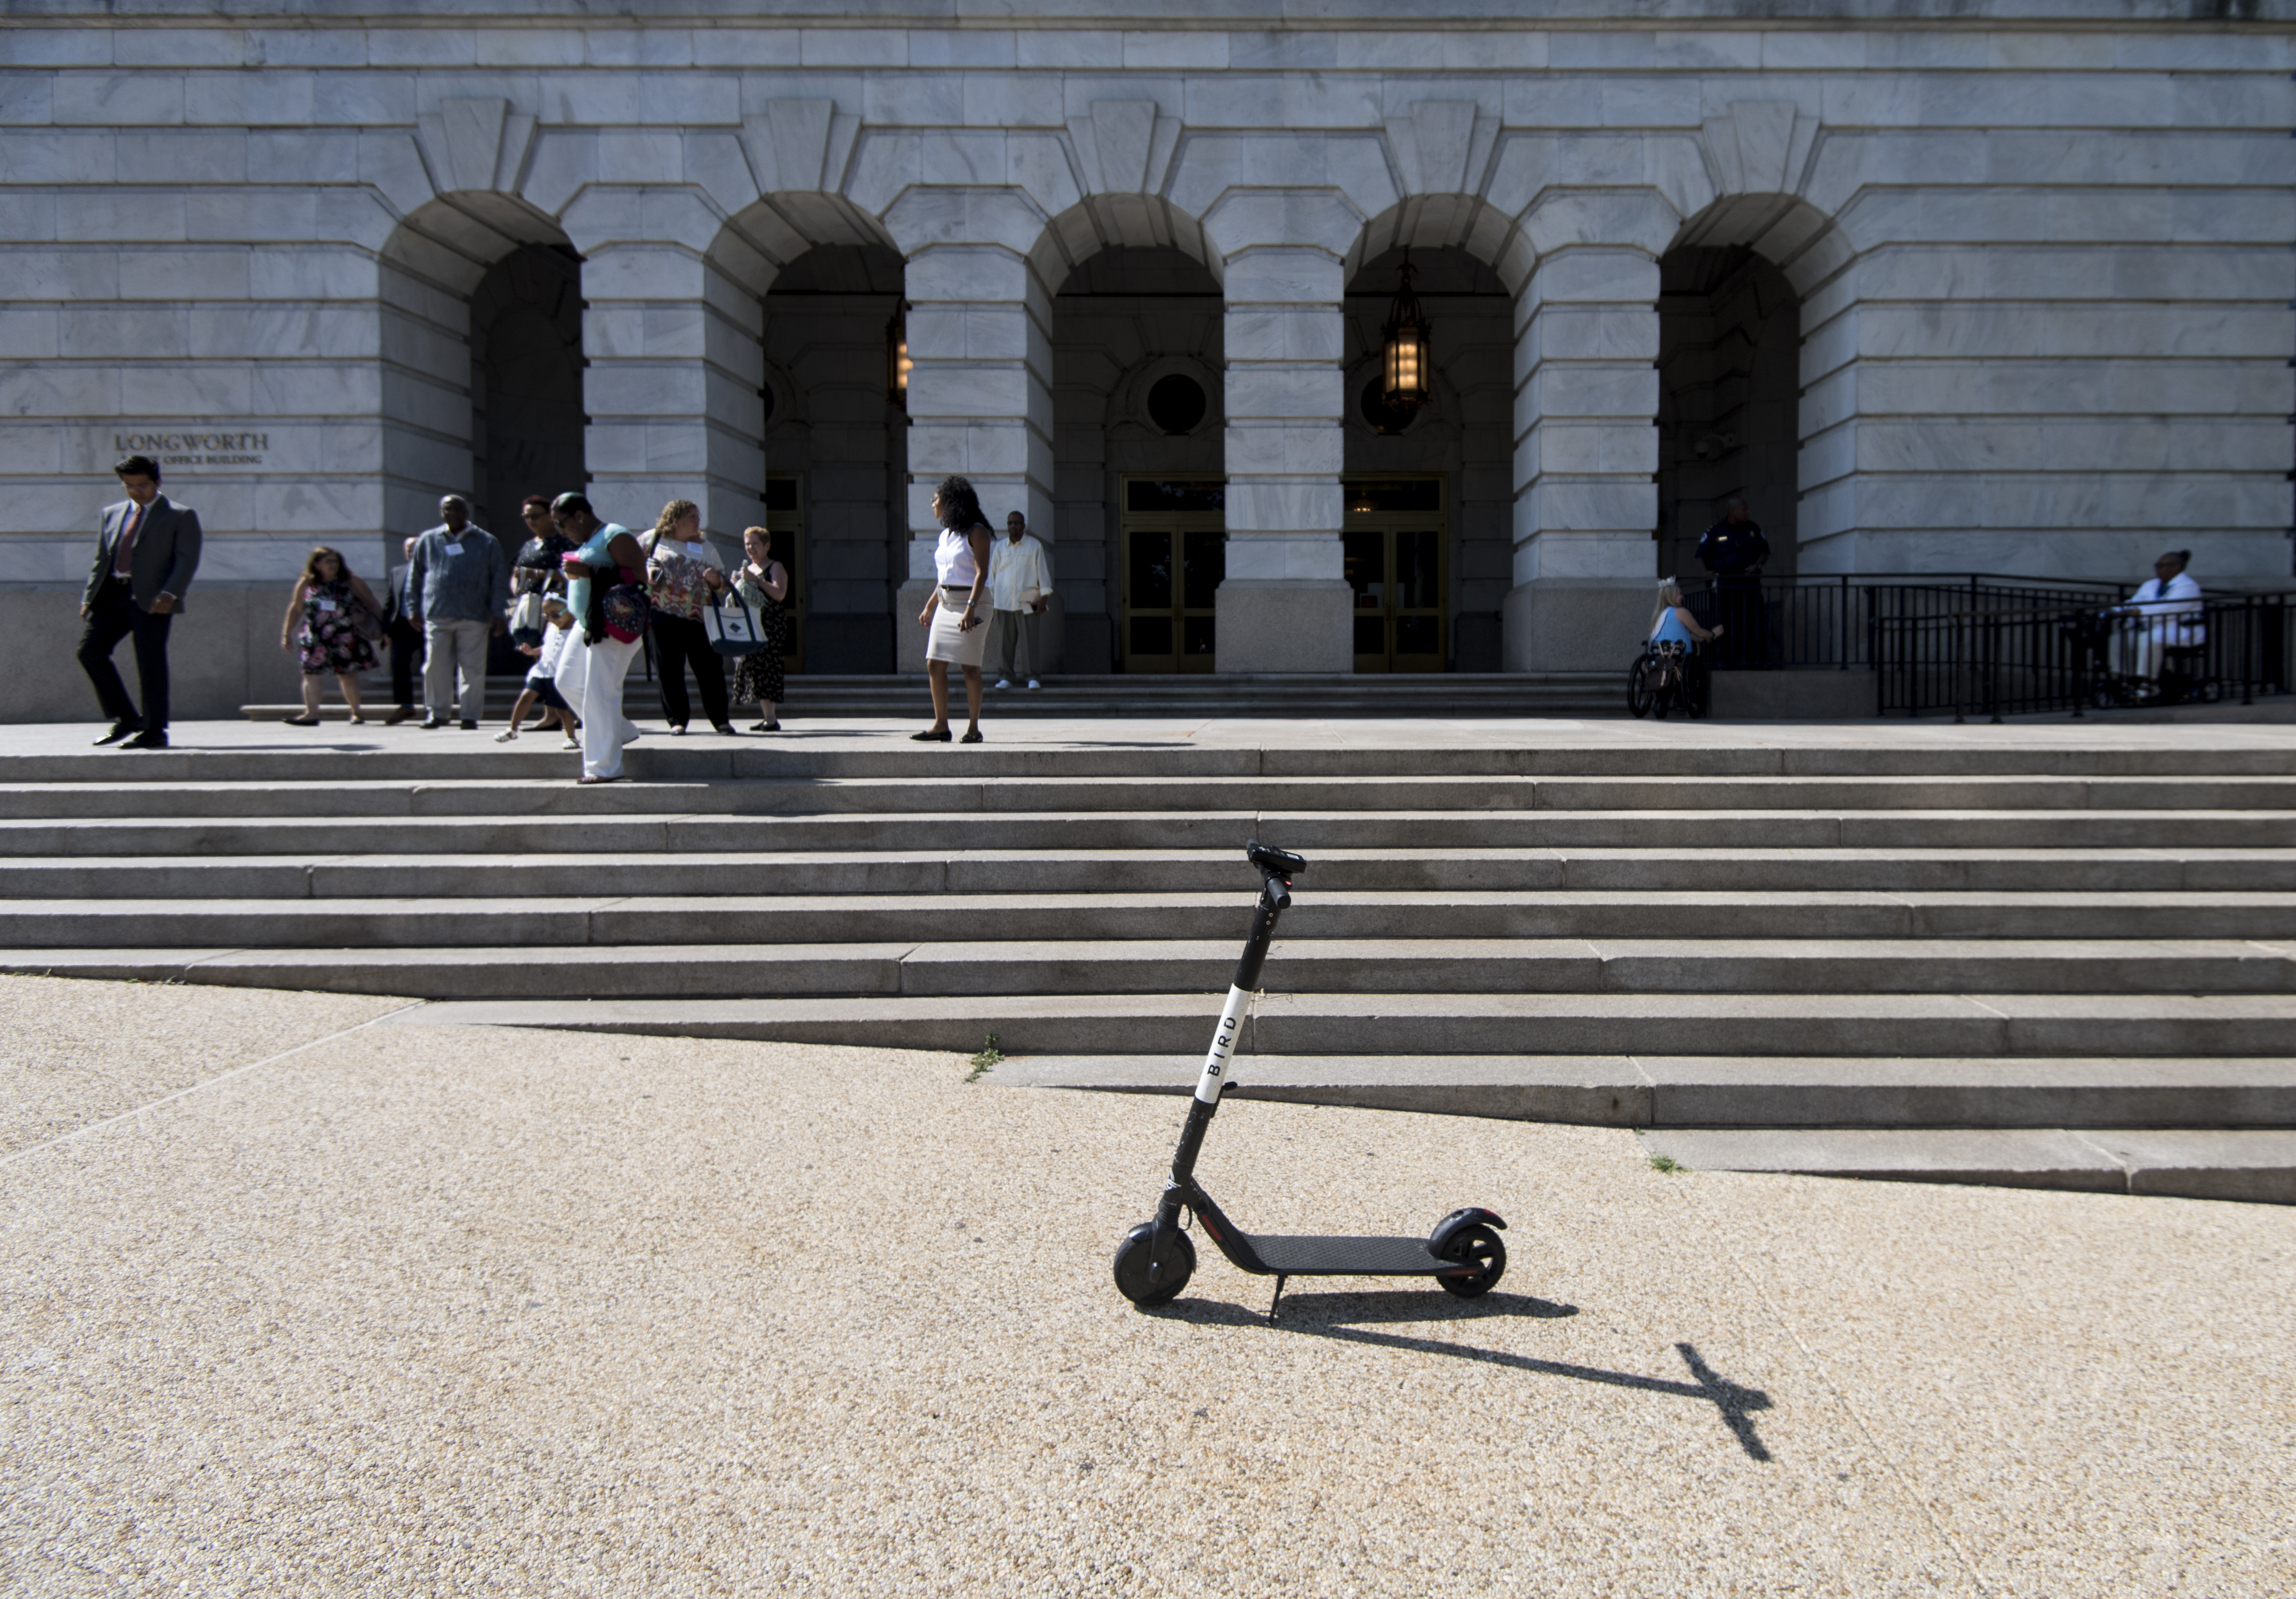 An electric scooter on a sidewalk in front of a classical building with archways.